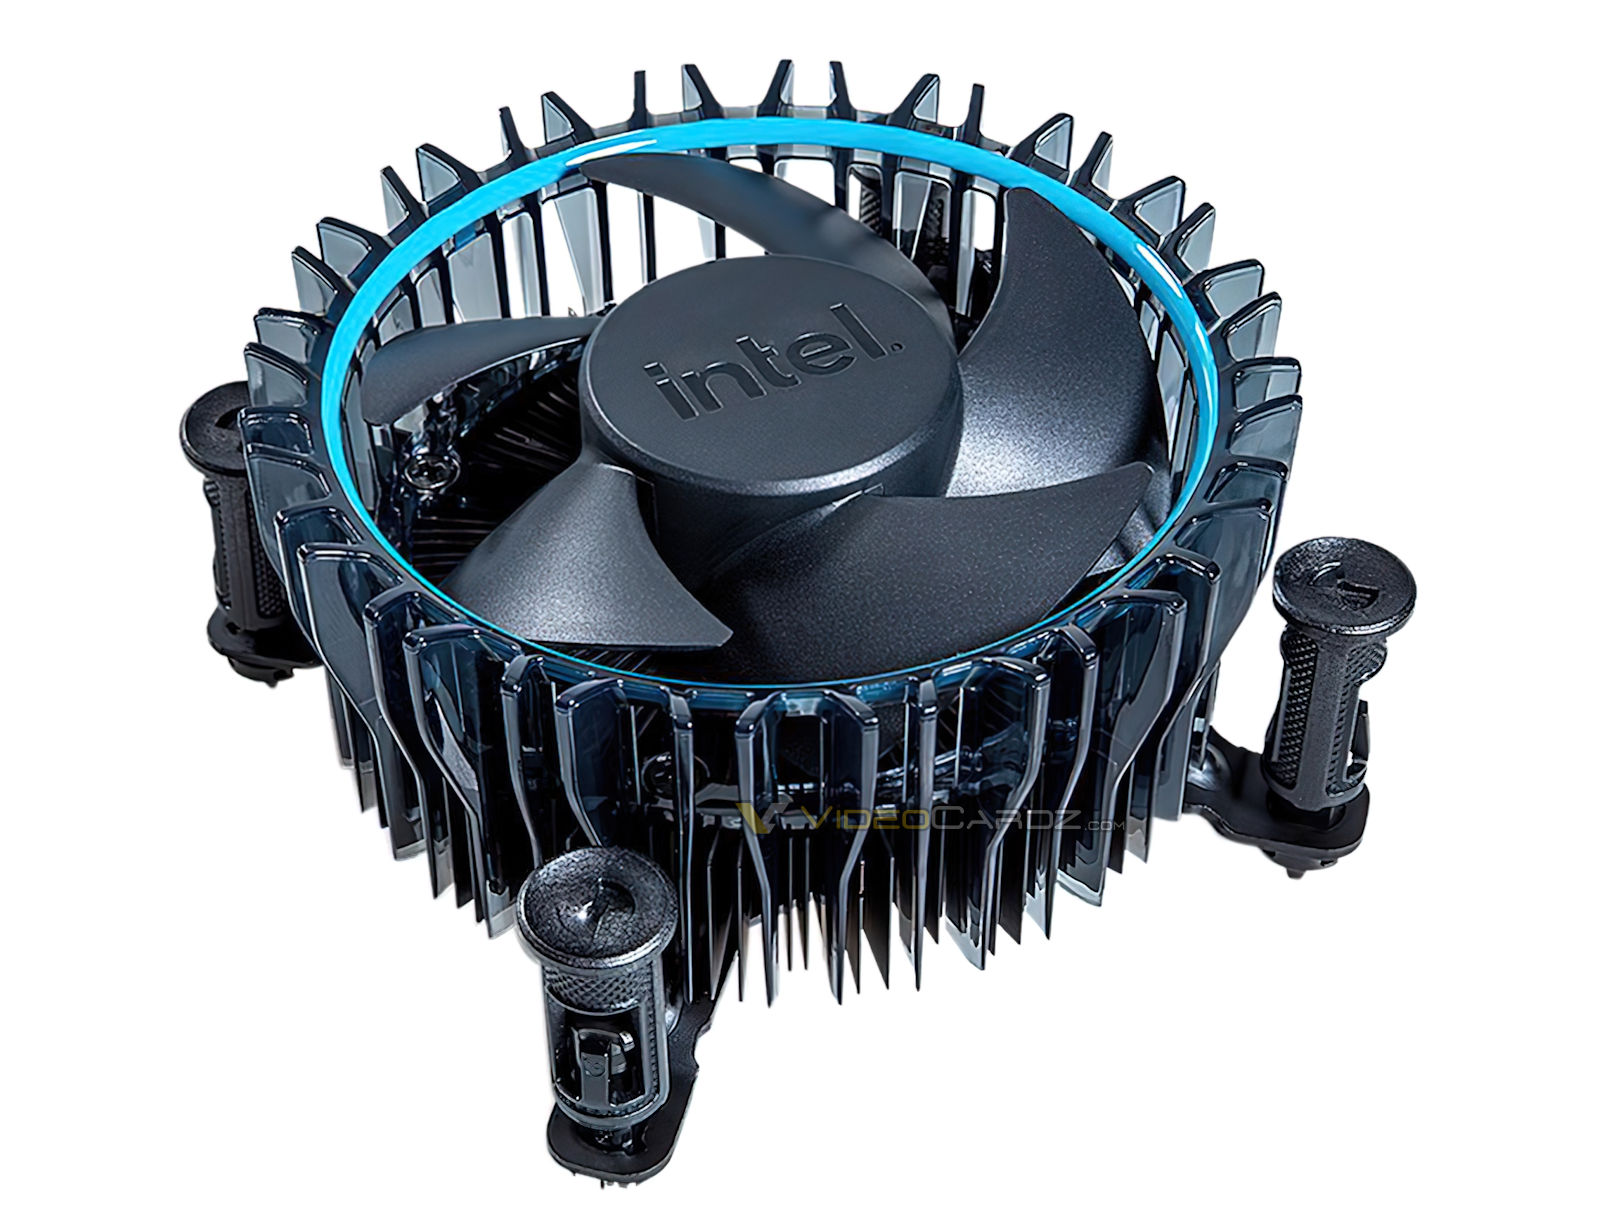 Intel's new stock CPU cooler for Alder Lake is real, the first leaks out -